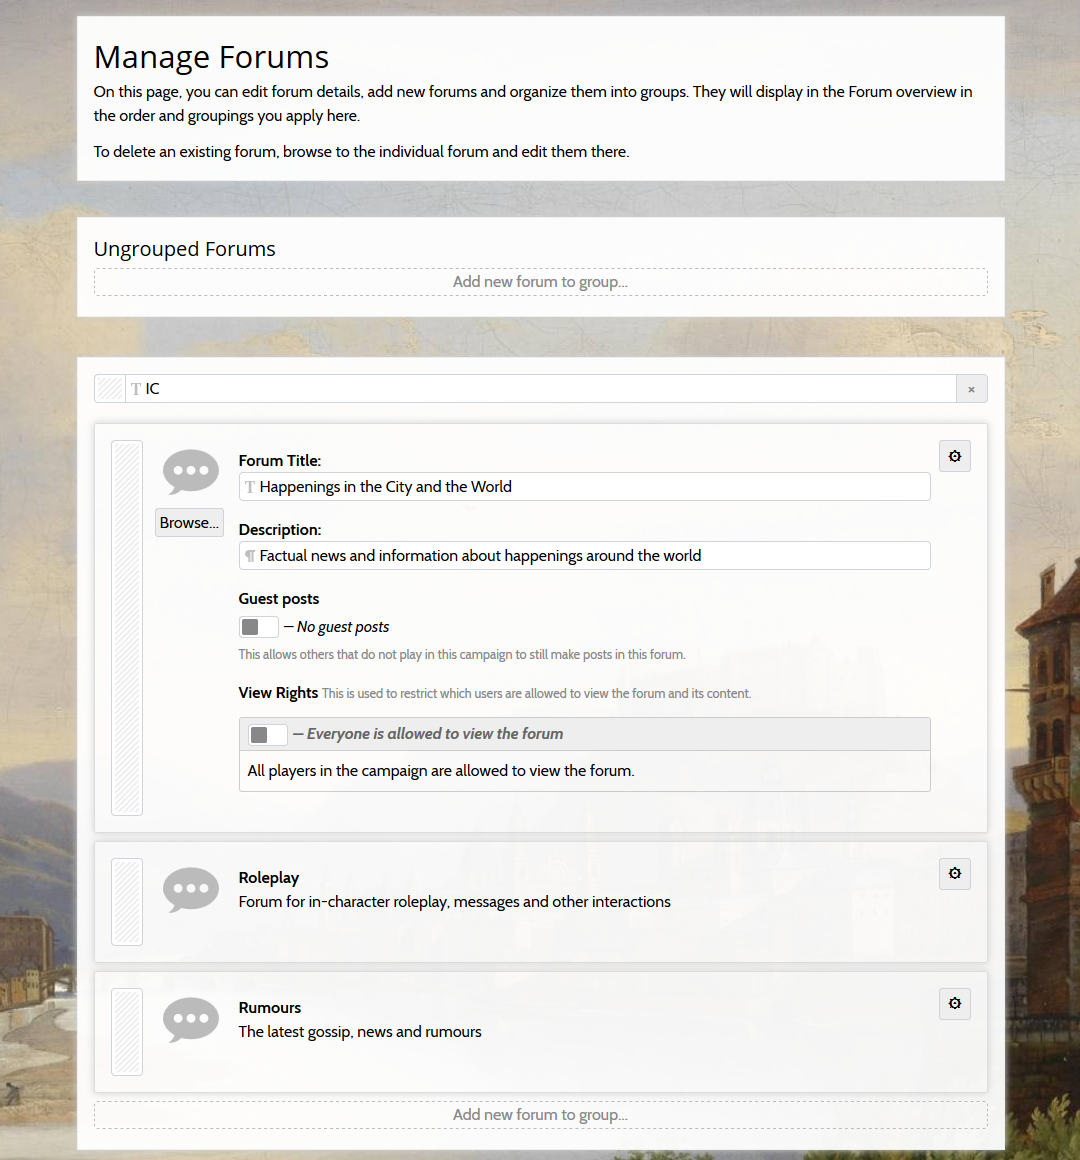 Manage Forums